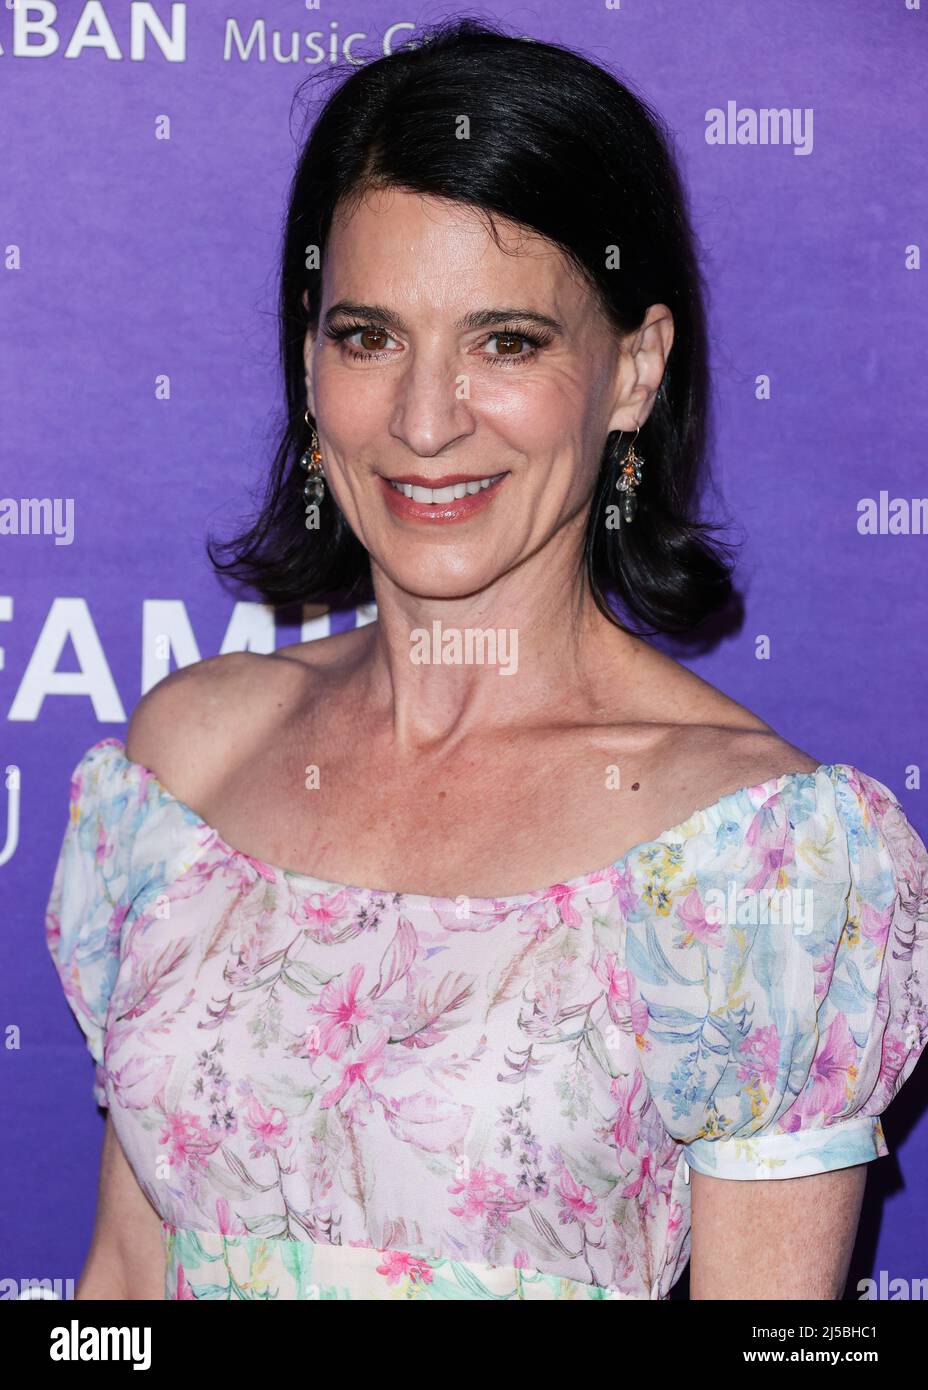 Hollywood, USA. 21st Apr, 2022. WEST HOLLYWOOD, LOS ANGELES, CALIFORNIA, USA - APRIL 21: American film actress Perrey Reeves arrives at the LA Family Housing (LAFH) Awards 2022 held at the Pacific Design Center on April 21, 2022 in West Hollywood, Los Angeles, California, United States. (Photo by Xavier Collin/Image Press Agency) Credit: Image Press Agency/Alamy Live News Stock Photo